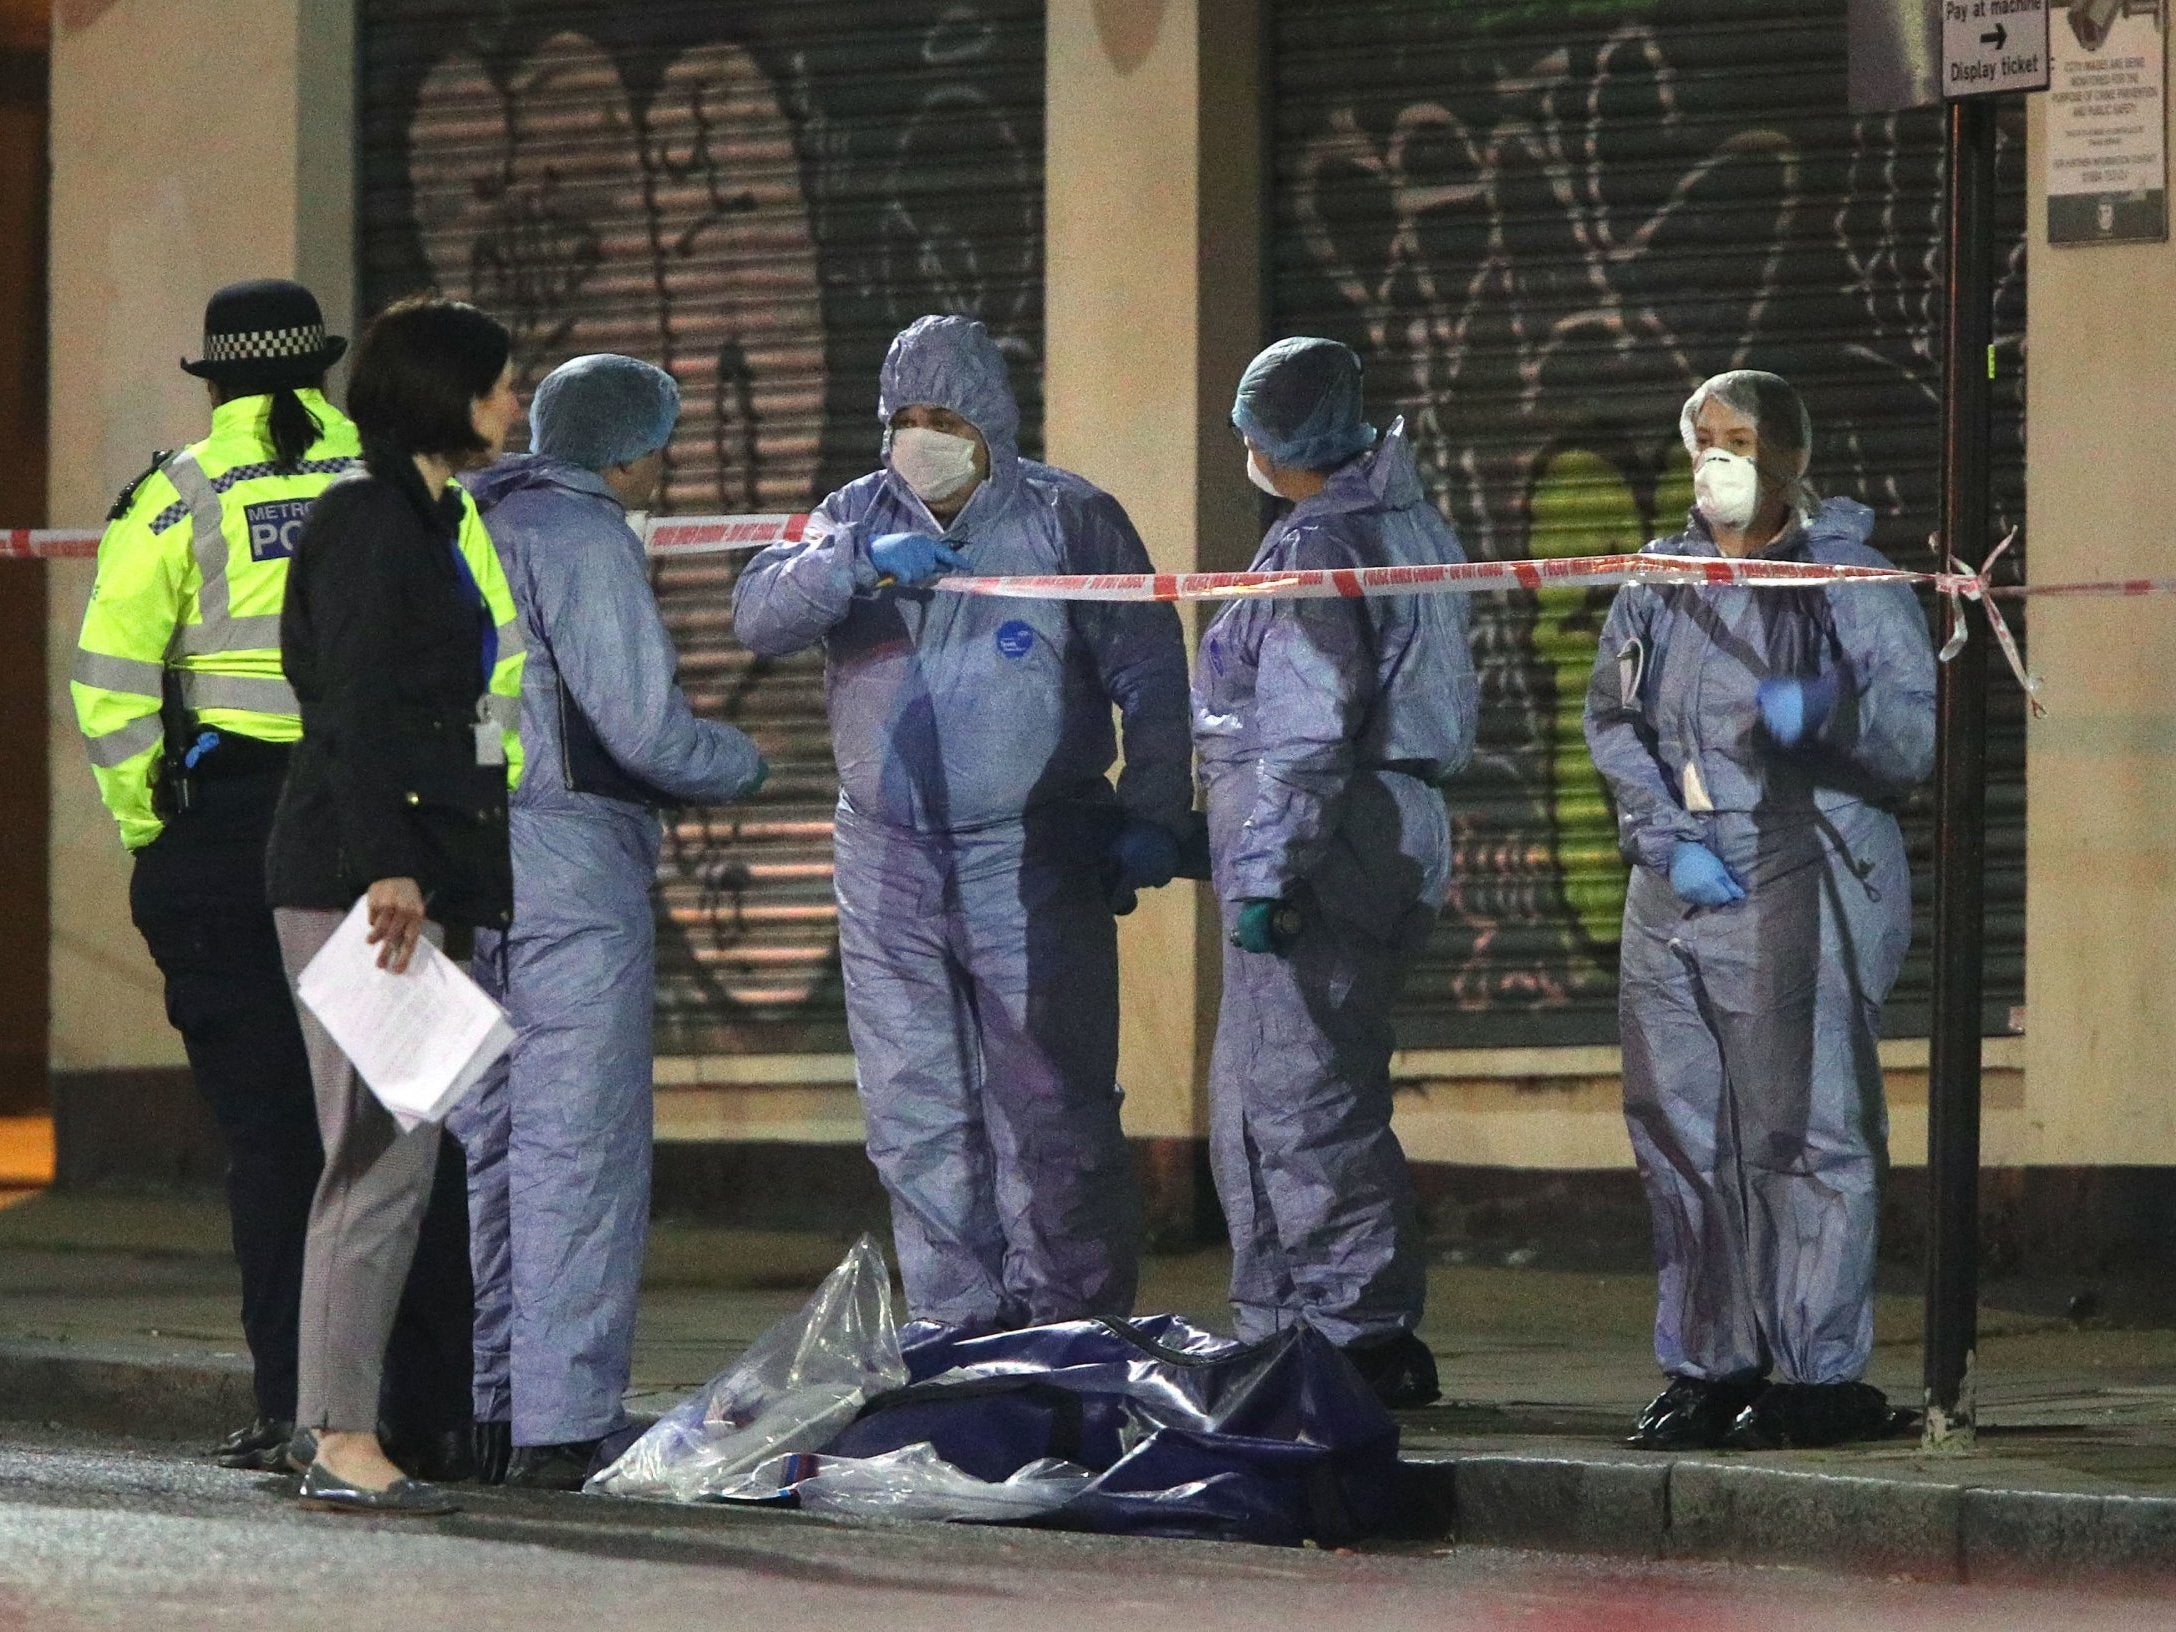 Forensic officers and police at the scene in Stoke Newington, northeast London, after a man was stabbed to death on 17 April